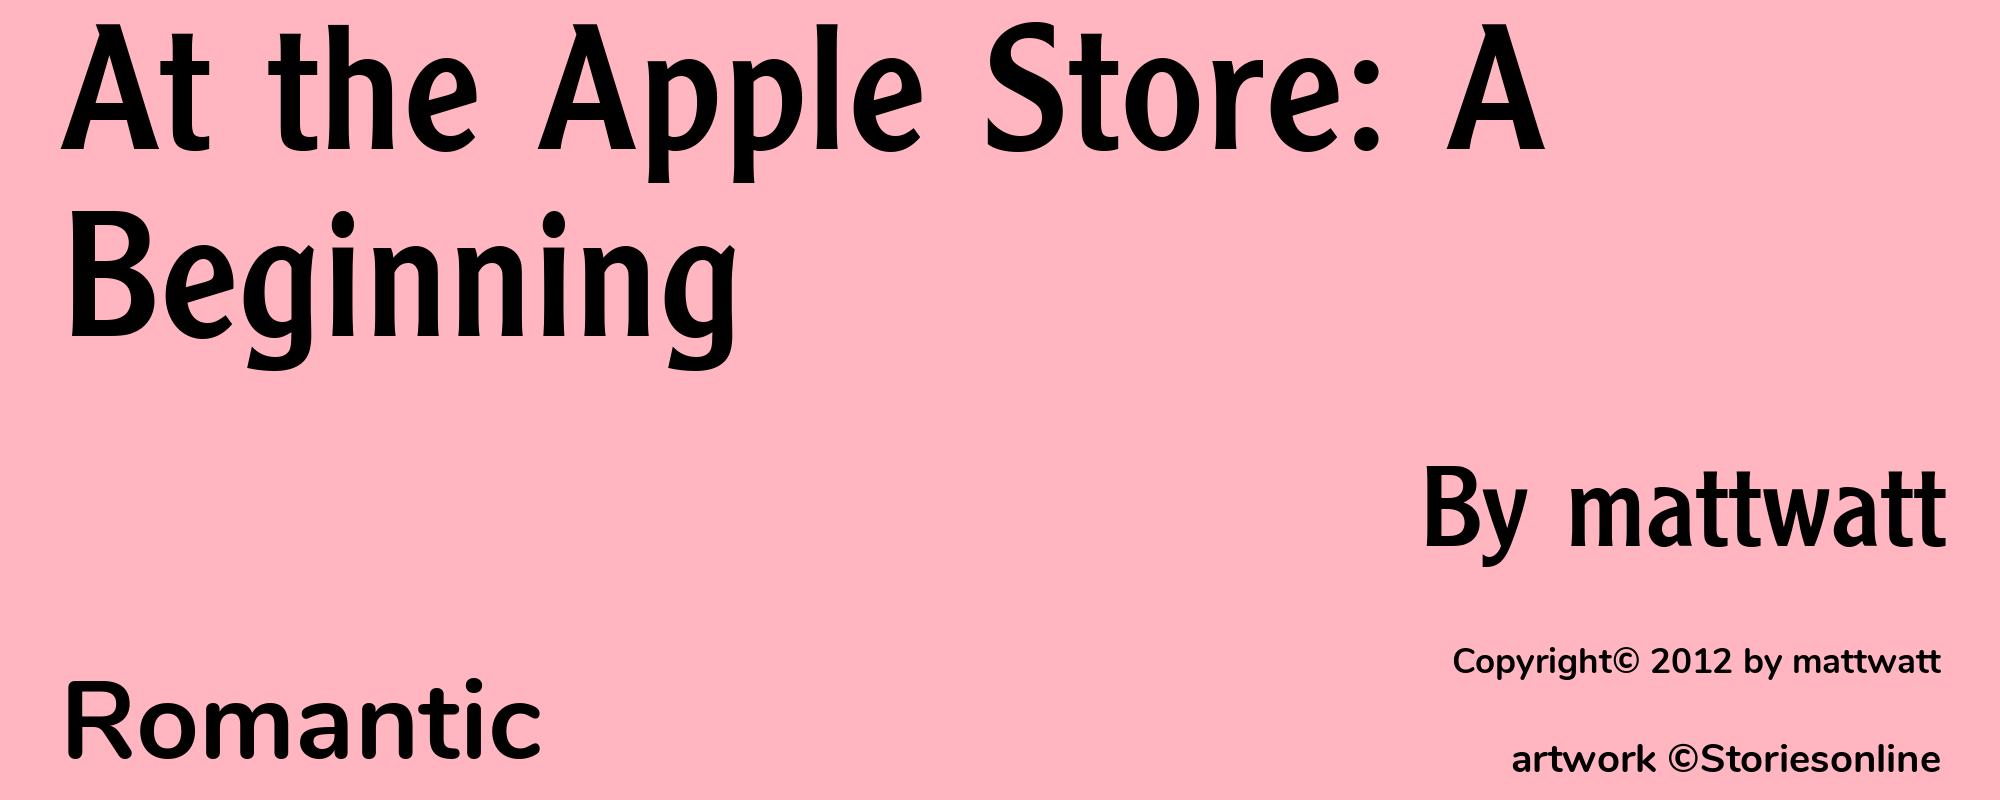 At the Apple Store: A Beginning - Cover